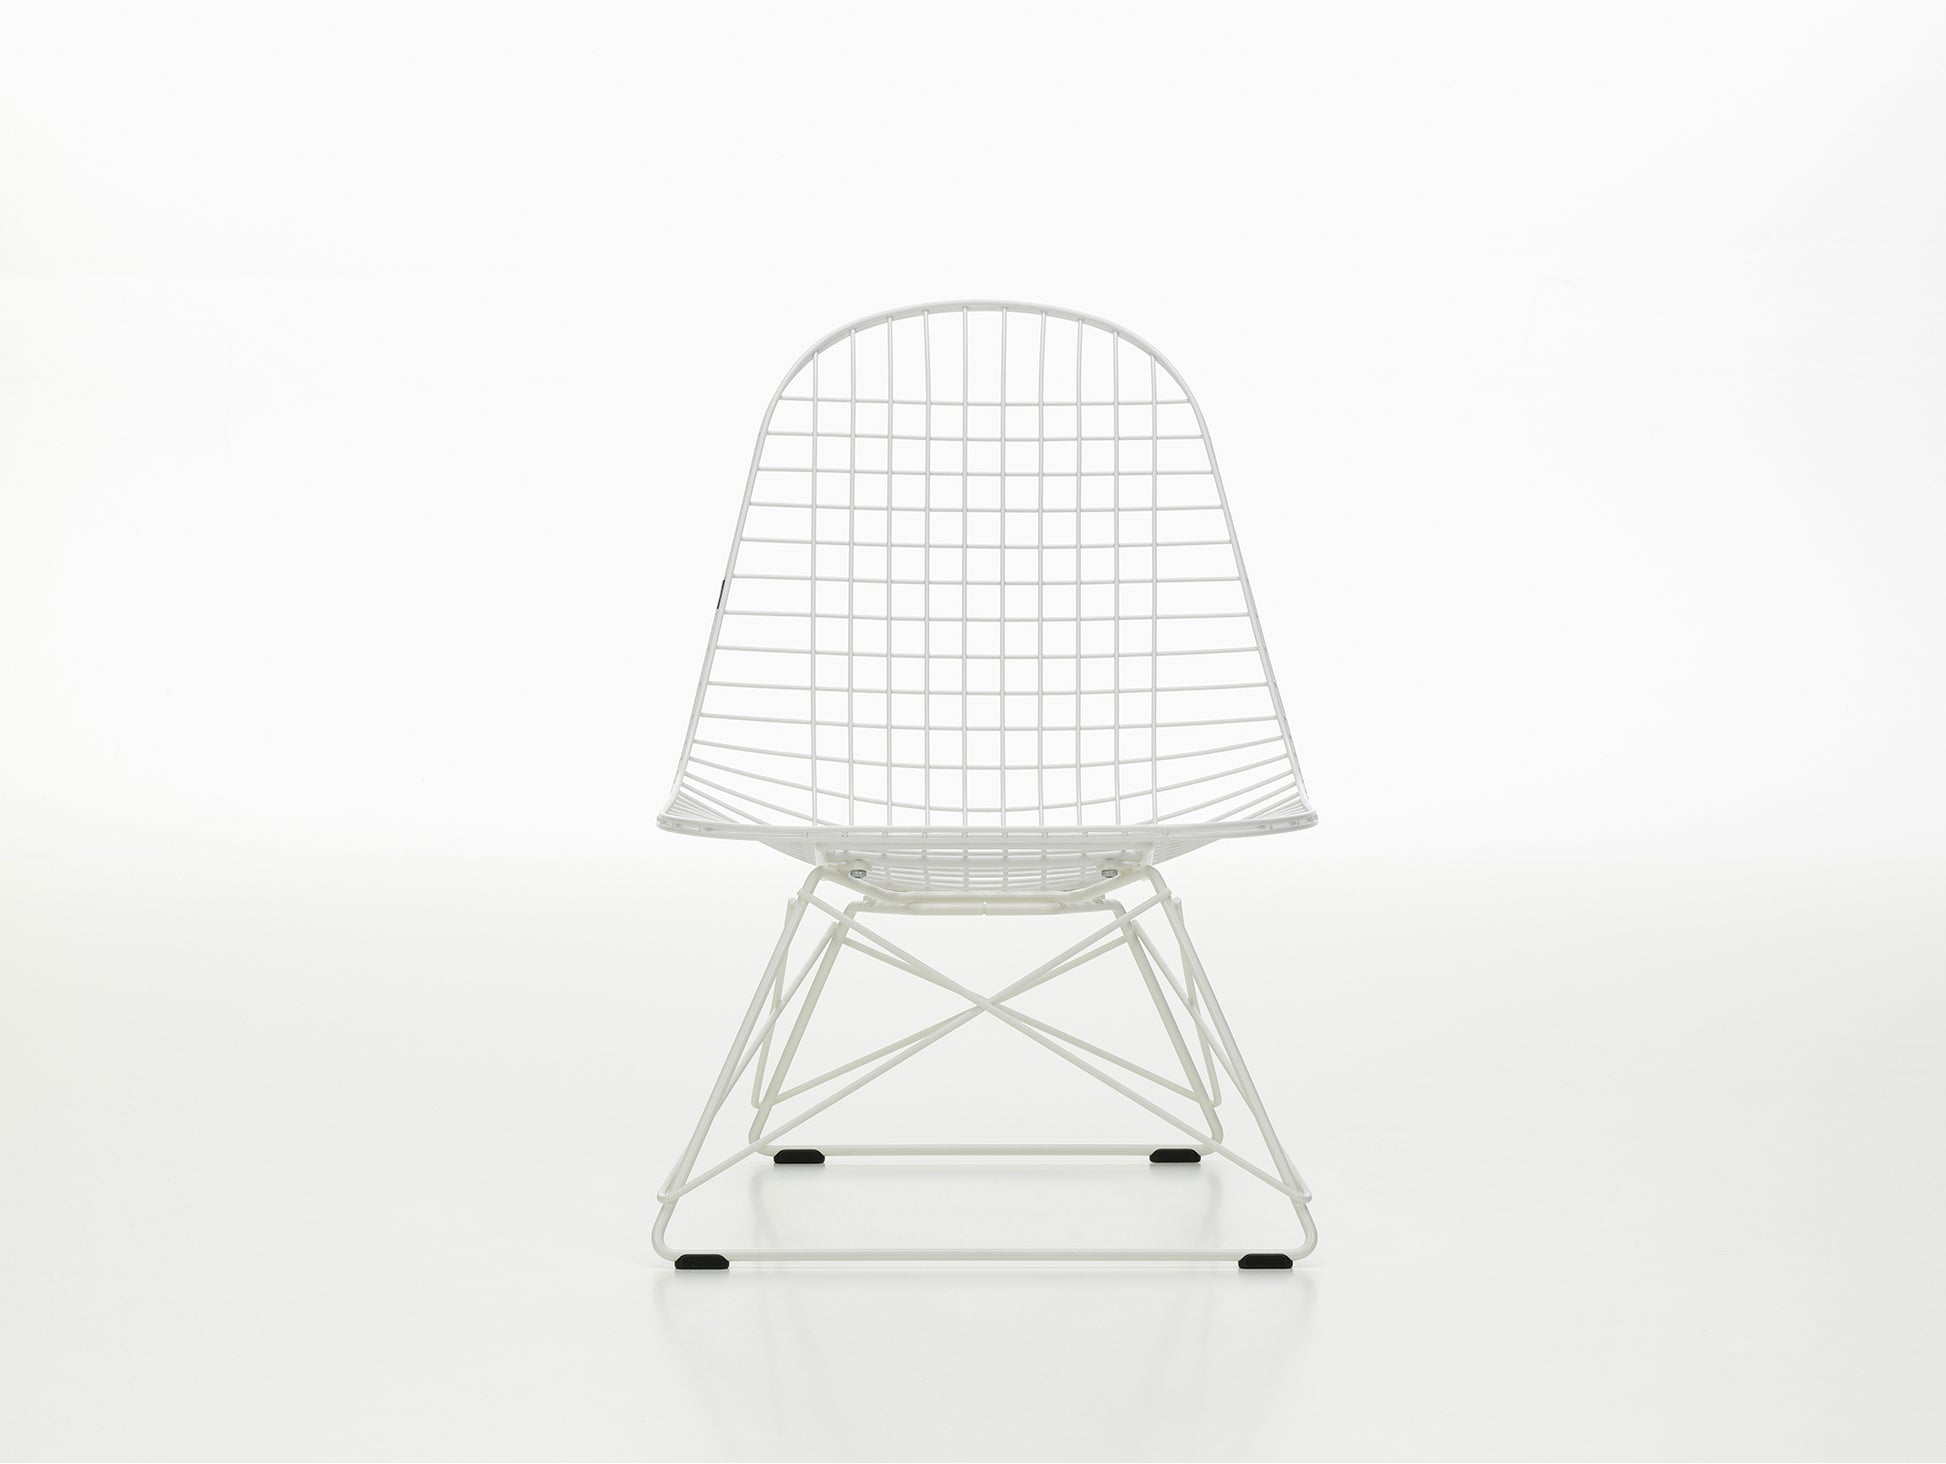 Eames LKR Wire Chair by Vitra - White Powder-Coated Steel